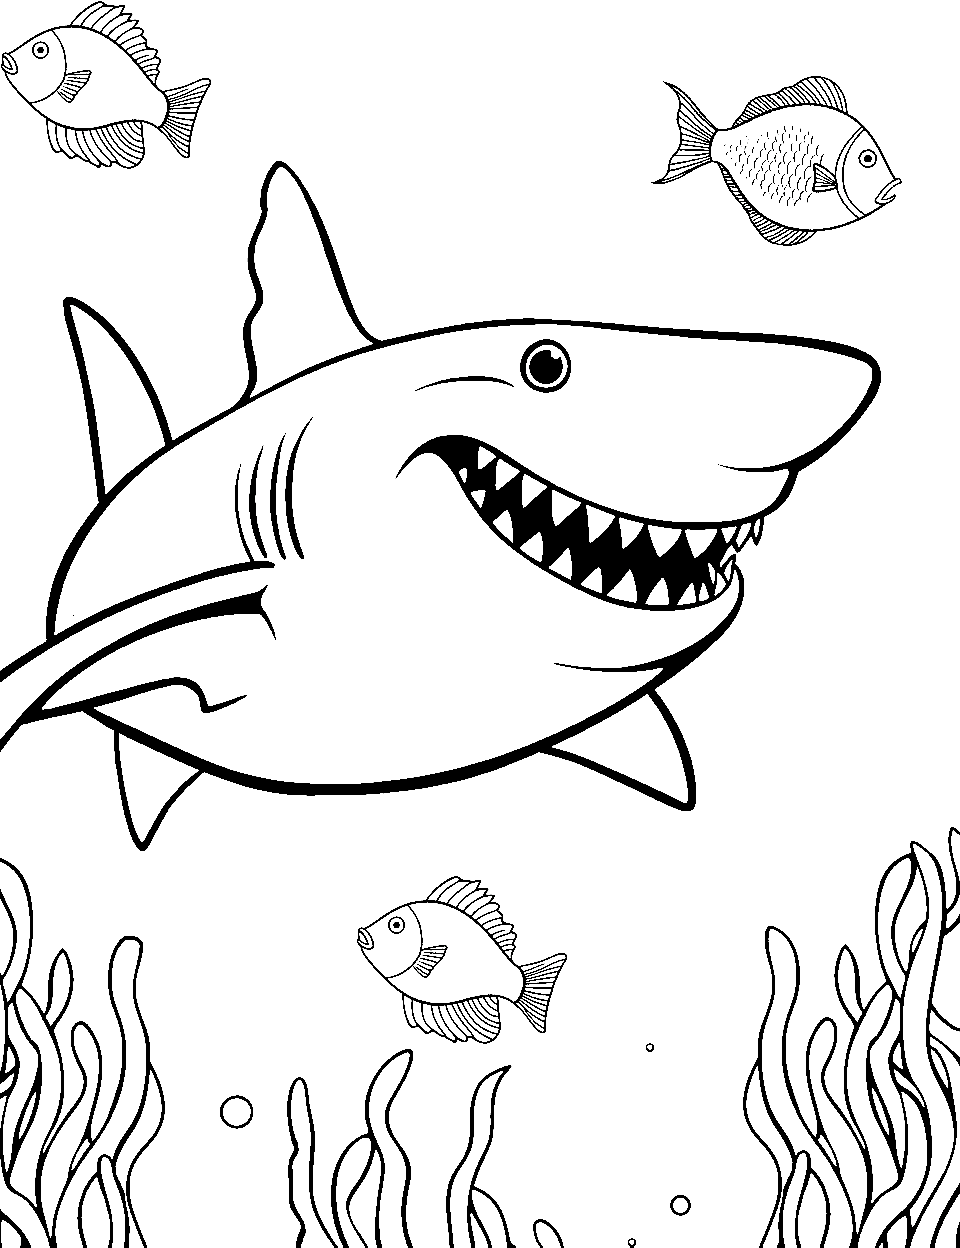 Fierce Shark Hunt Ocean Coloring Page - A shark with its mouth open, swimming through the ocean.